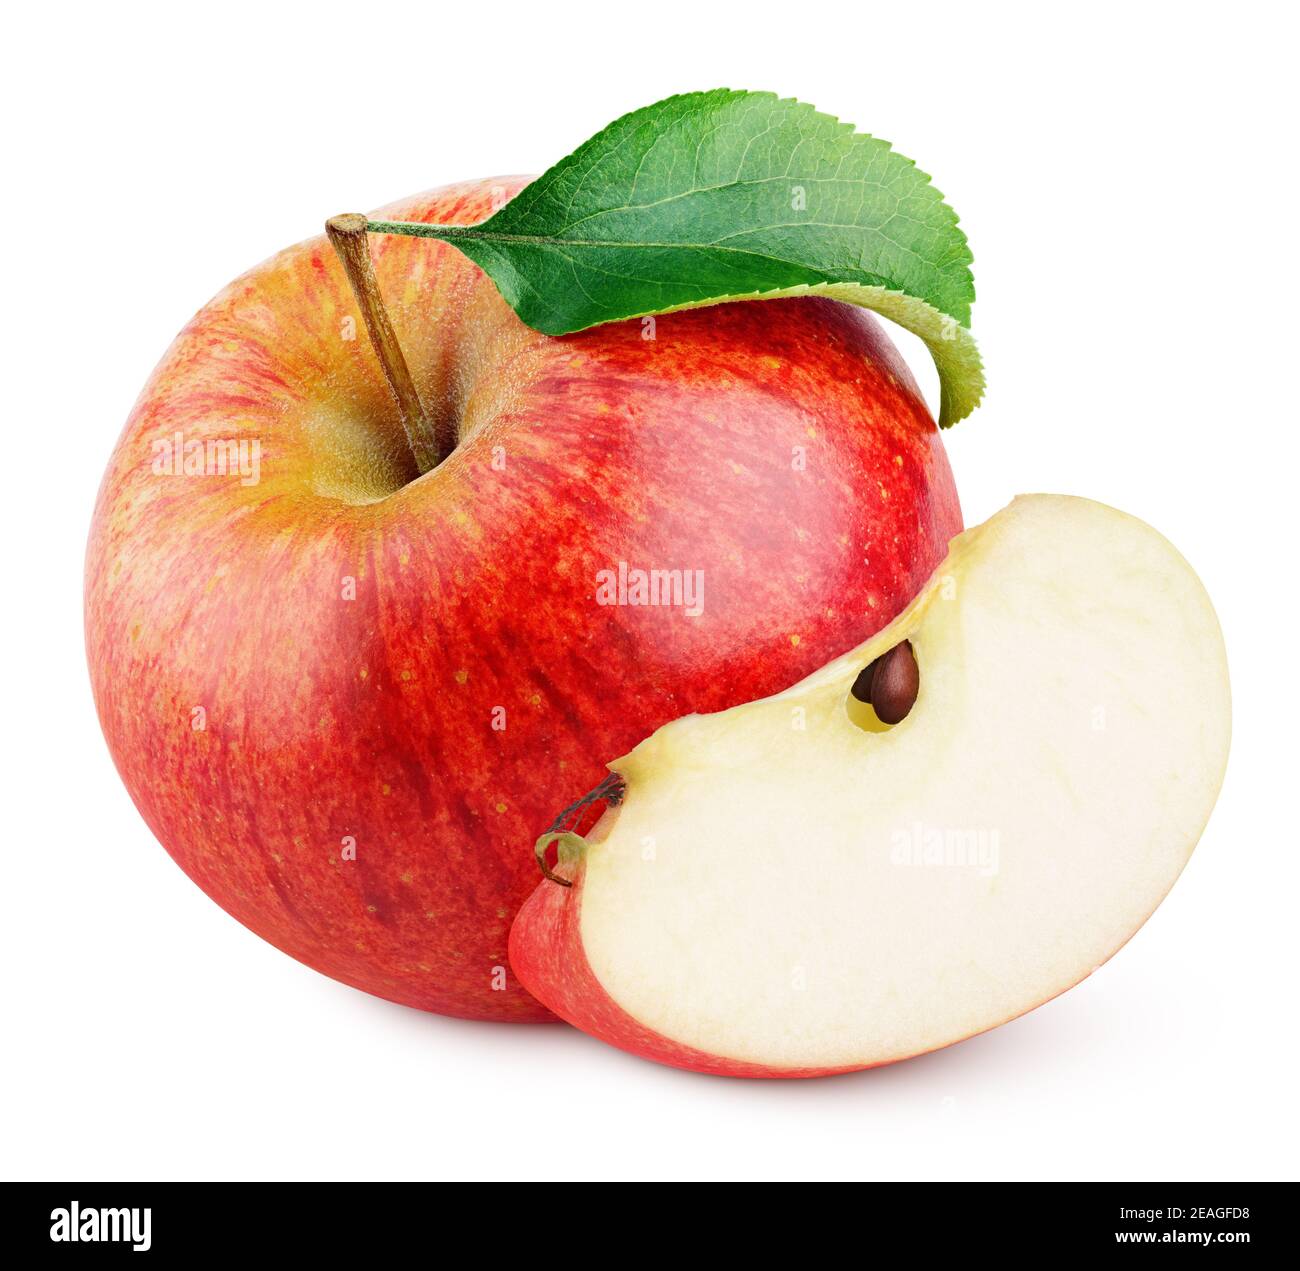 Ripe red apple fruit with apple slice and green leaf isolated on white background with clipping path Stock Photo